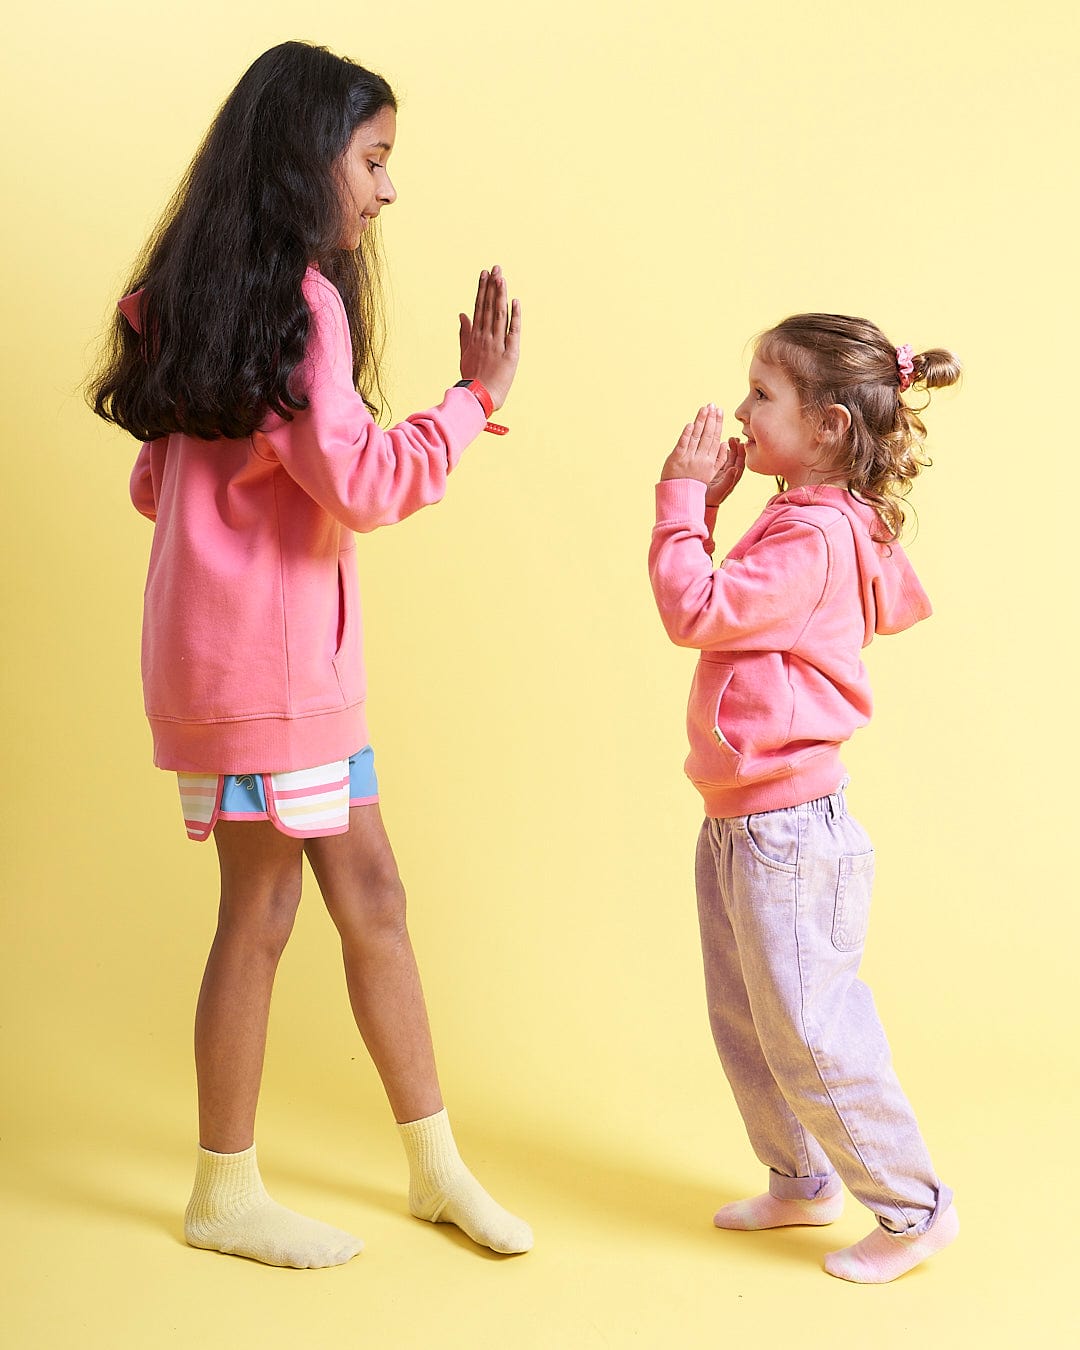 Two little girls in Seabed - Kids Pop Hoodie - Pink sweatshirts standing on a yellow background.